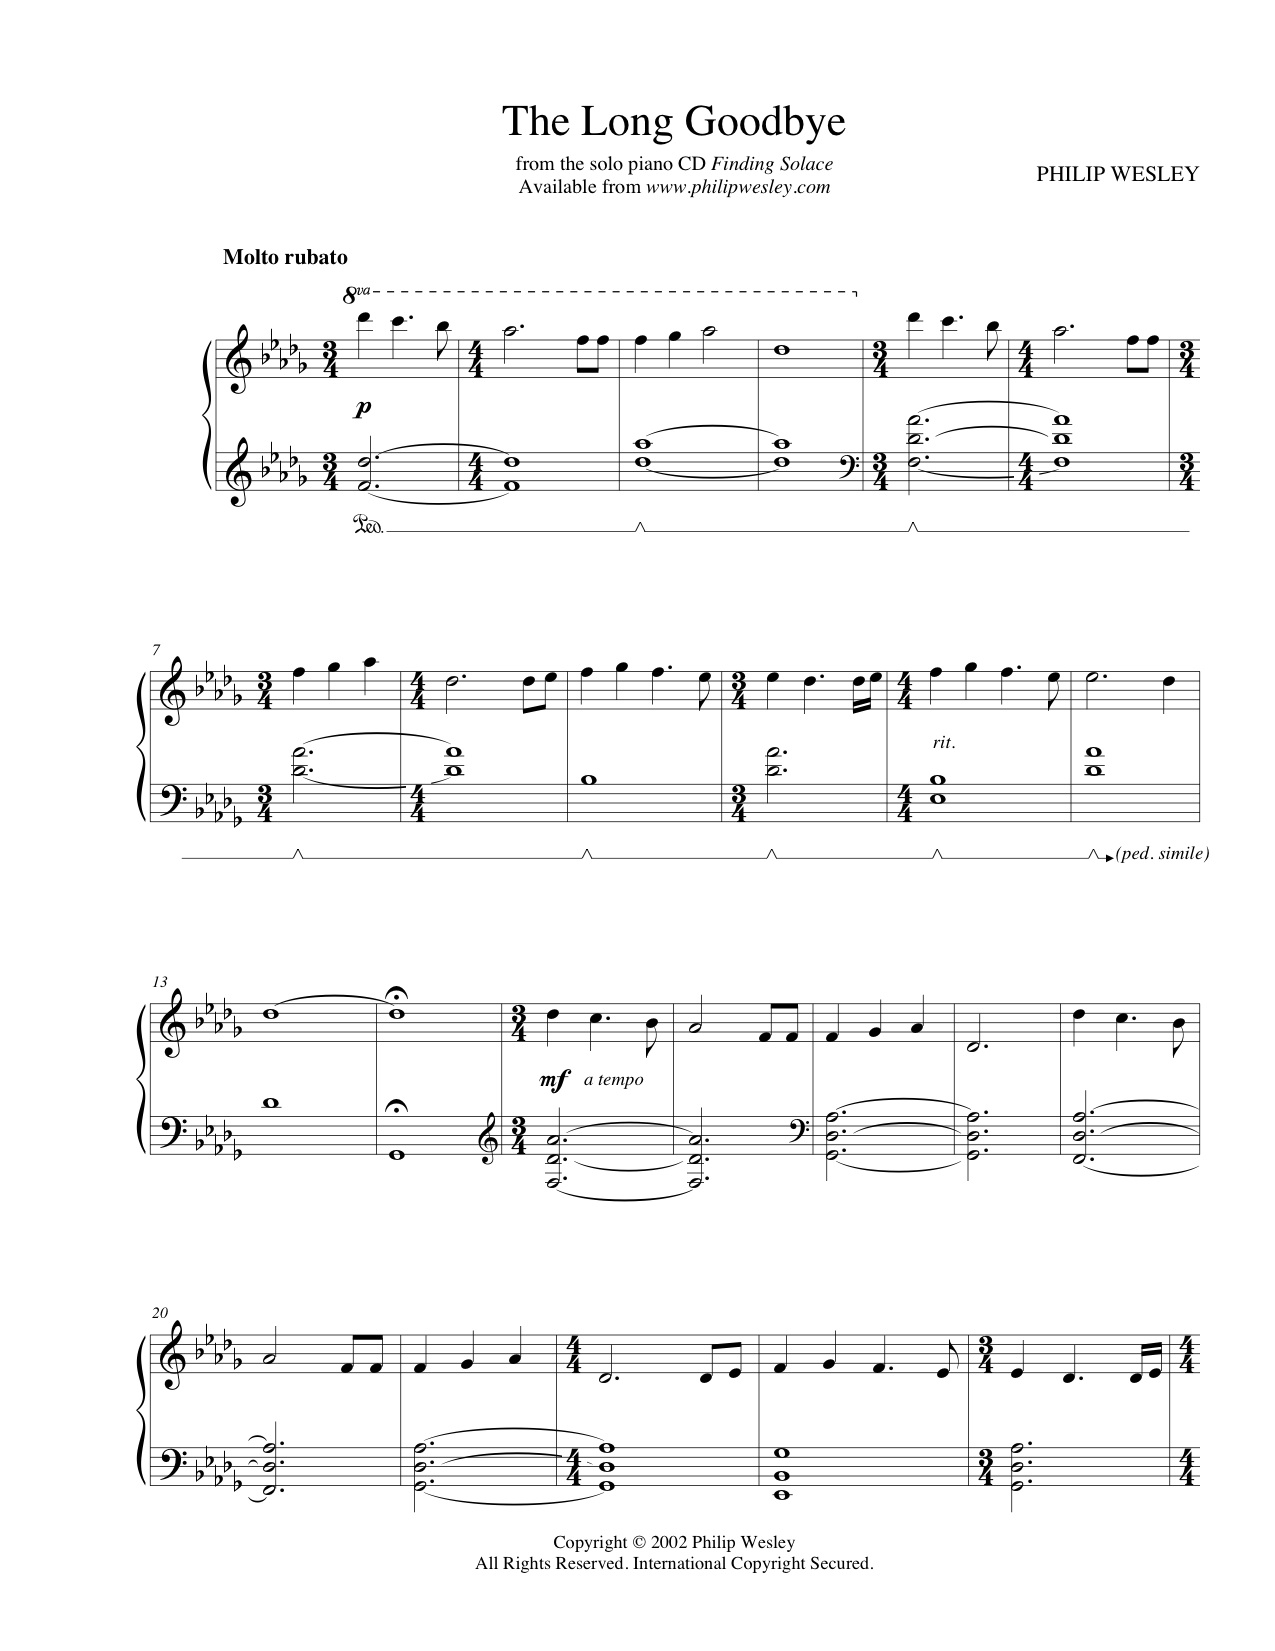 The Long Goodbye Finding Solace Sheet Music Philip Wesley